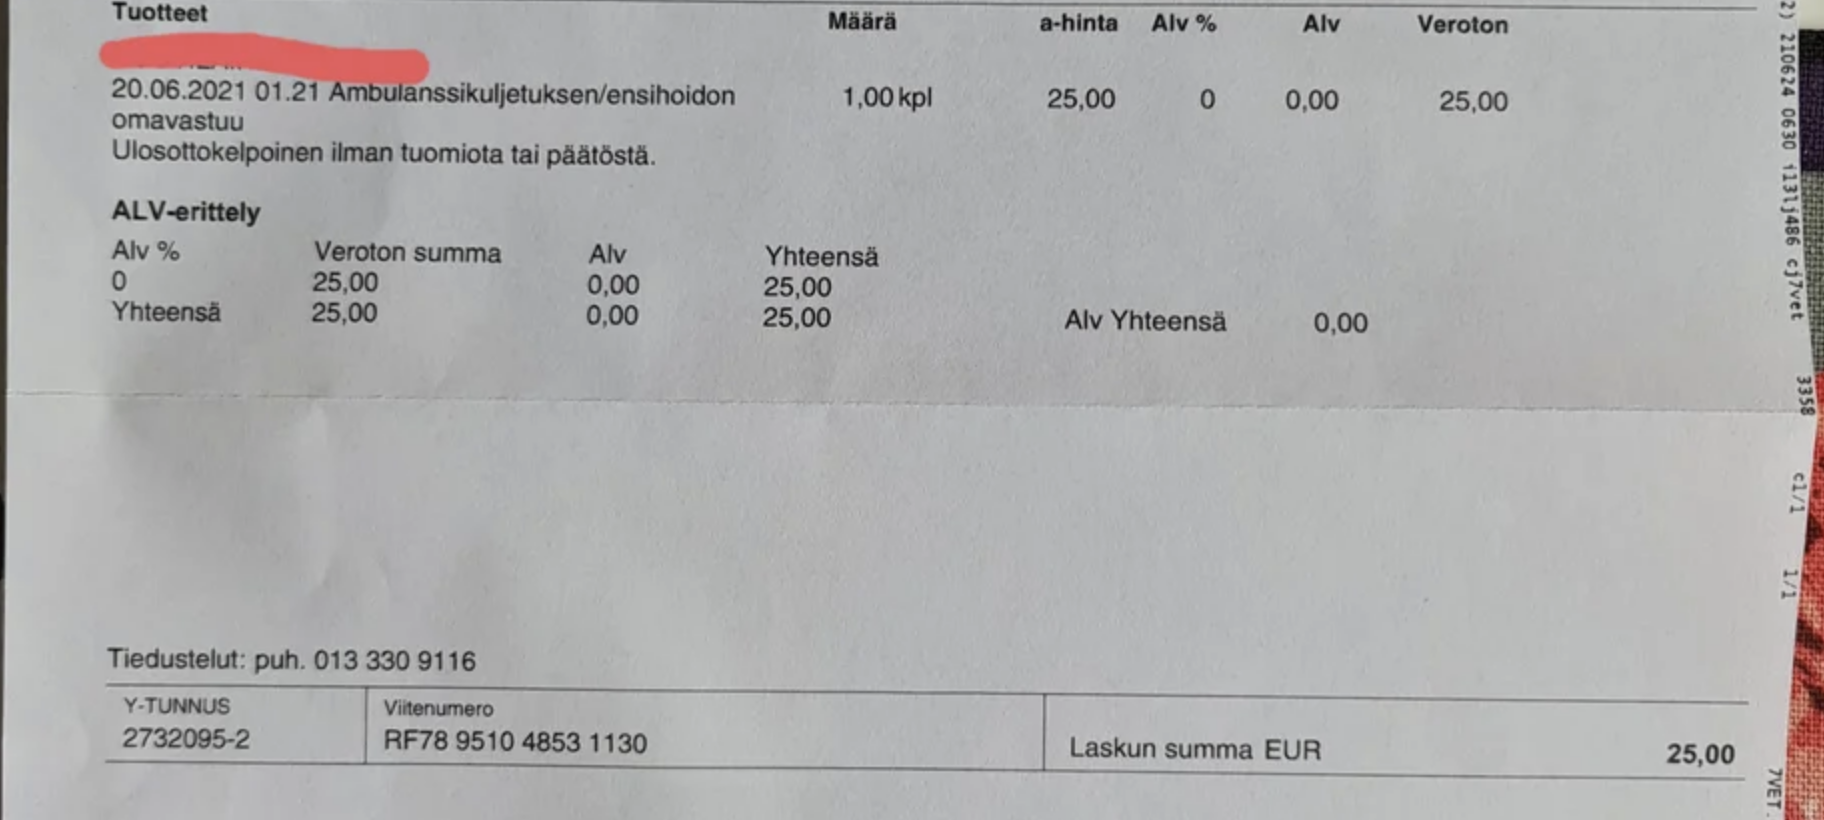 Bill showing that the hospital cost 25 euros